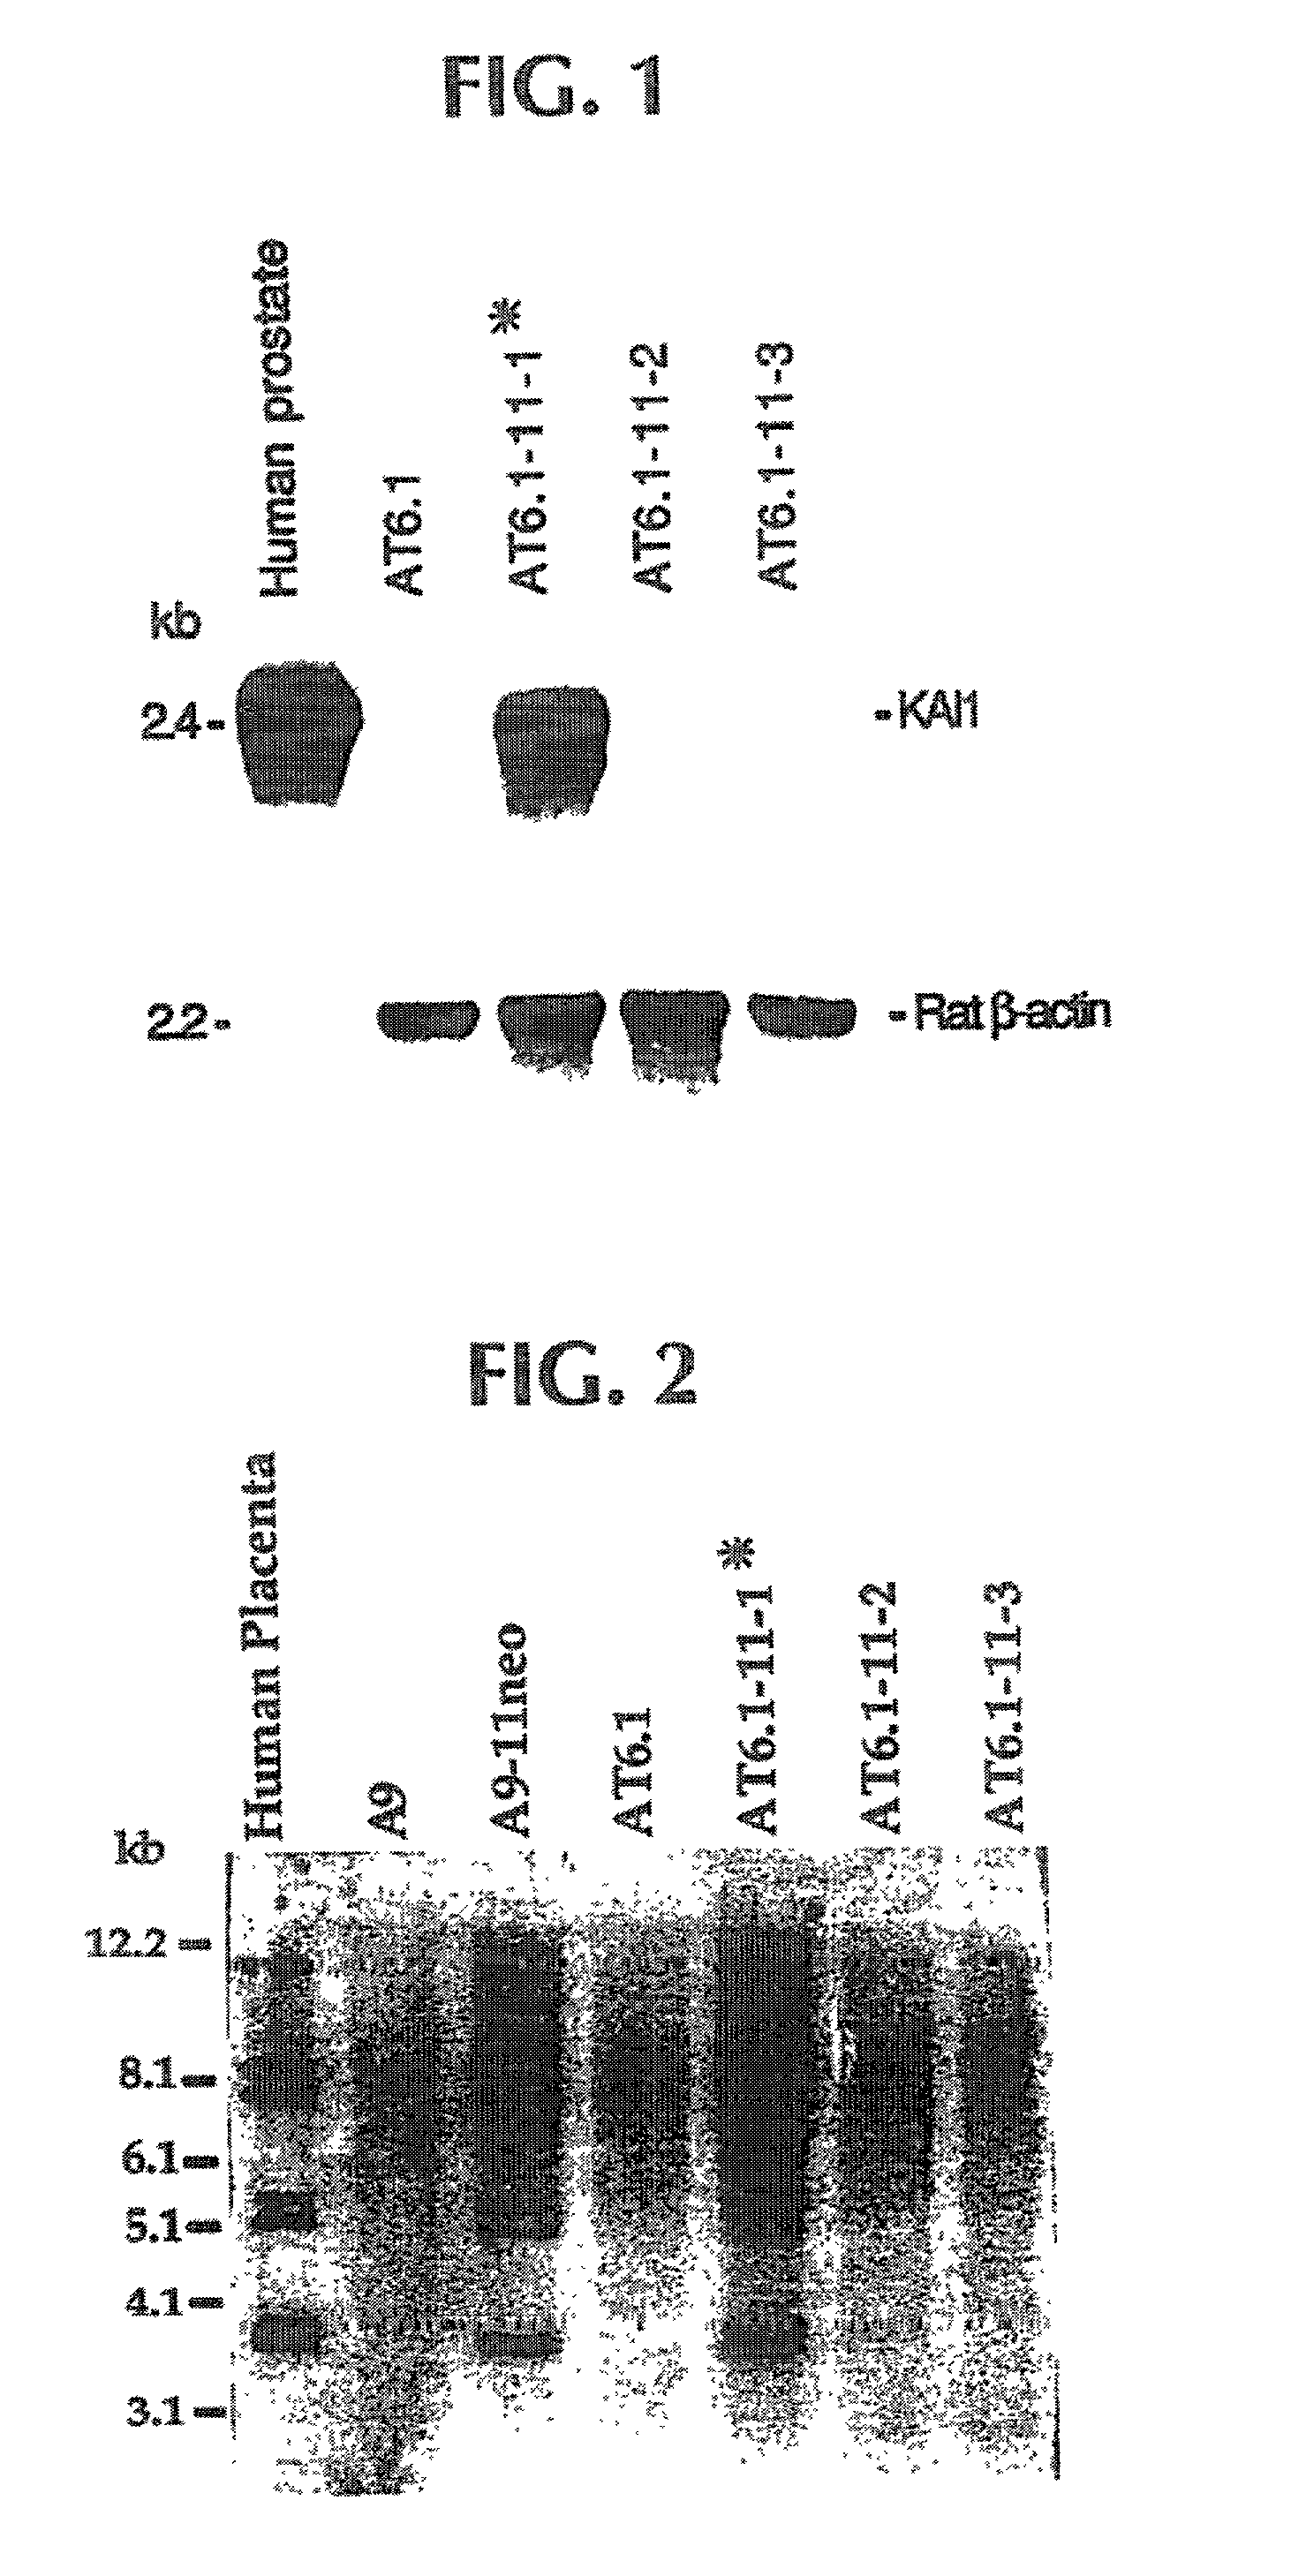 Diagnostic methods and gene therapy using reagents derived from the human metastasis suppressor gene KAI1